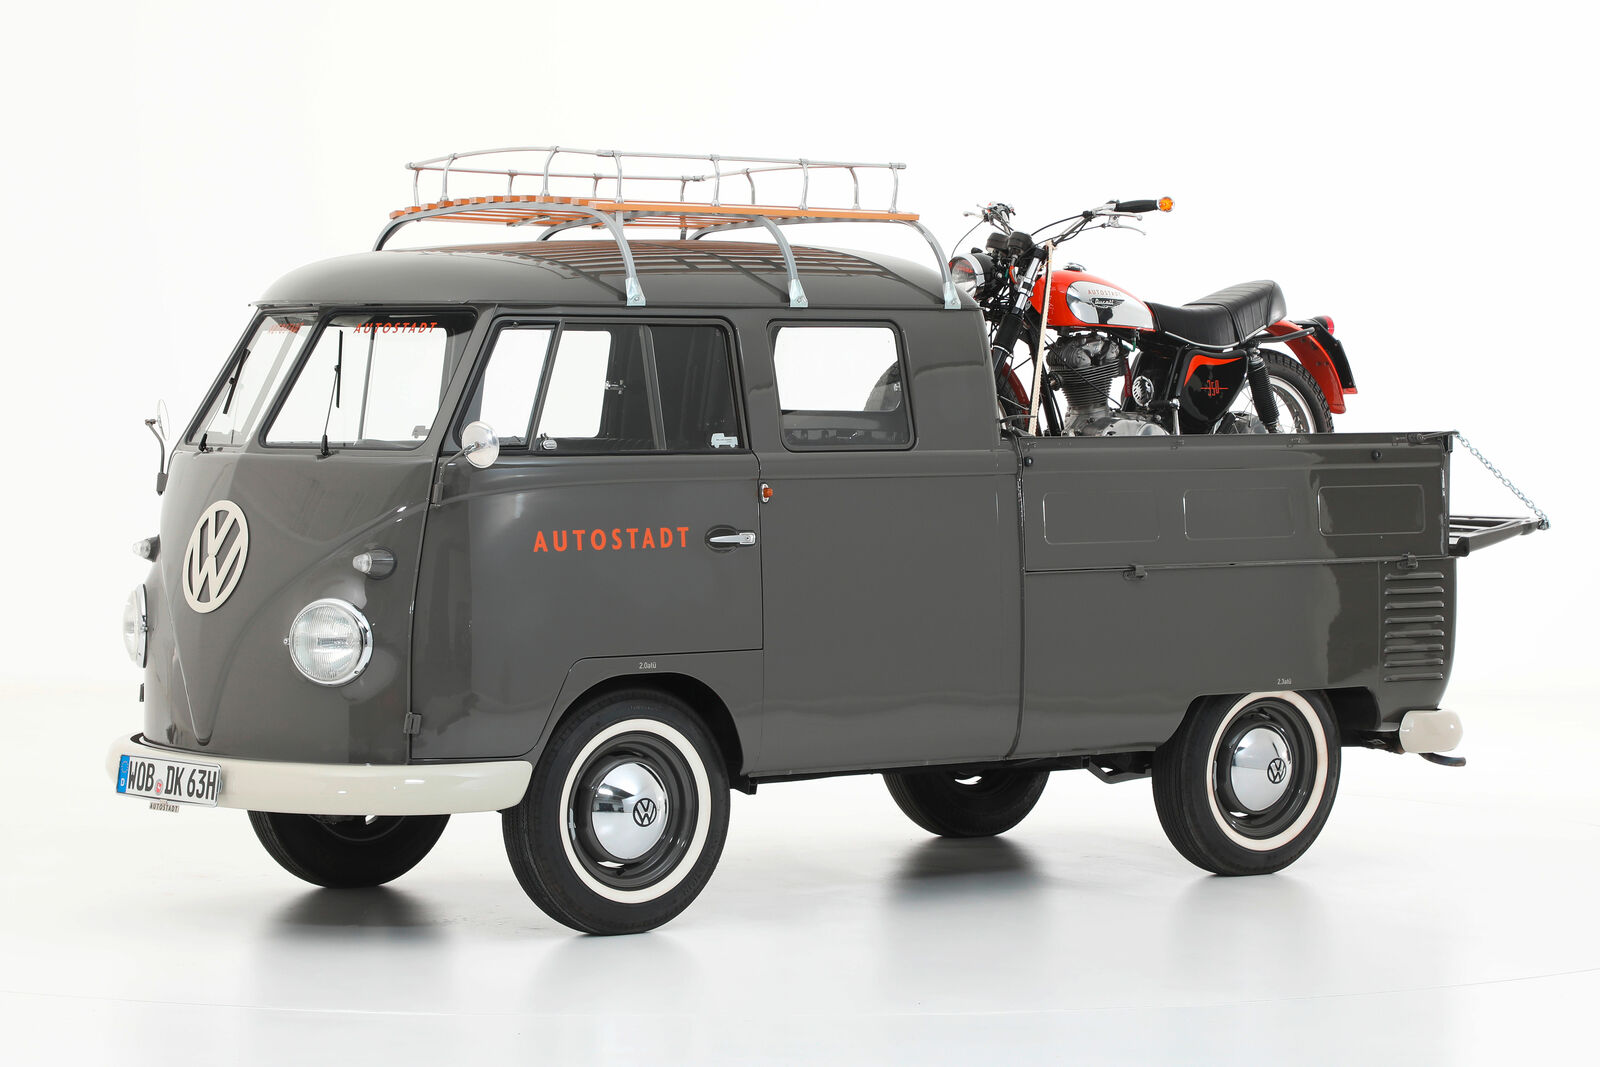 VVolkswagen Type 261 (1965) and Ducati Scrambler 350 (1973) of Autostadt’s historical car collection.